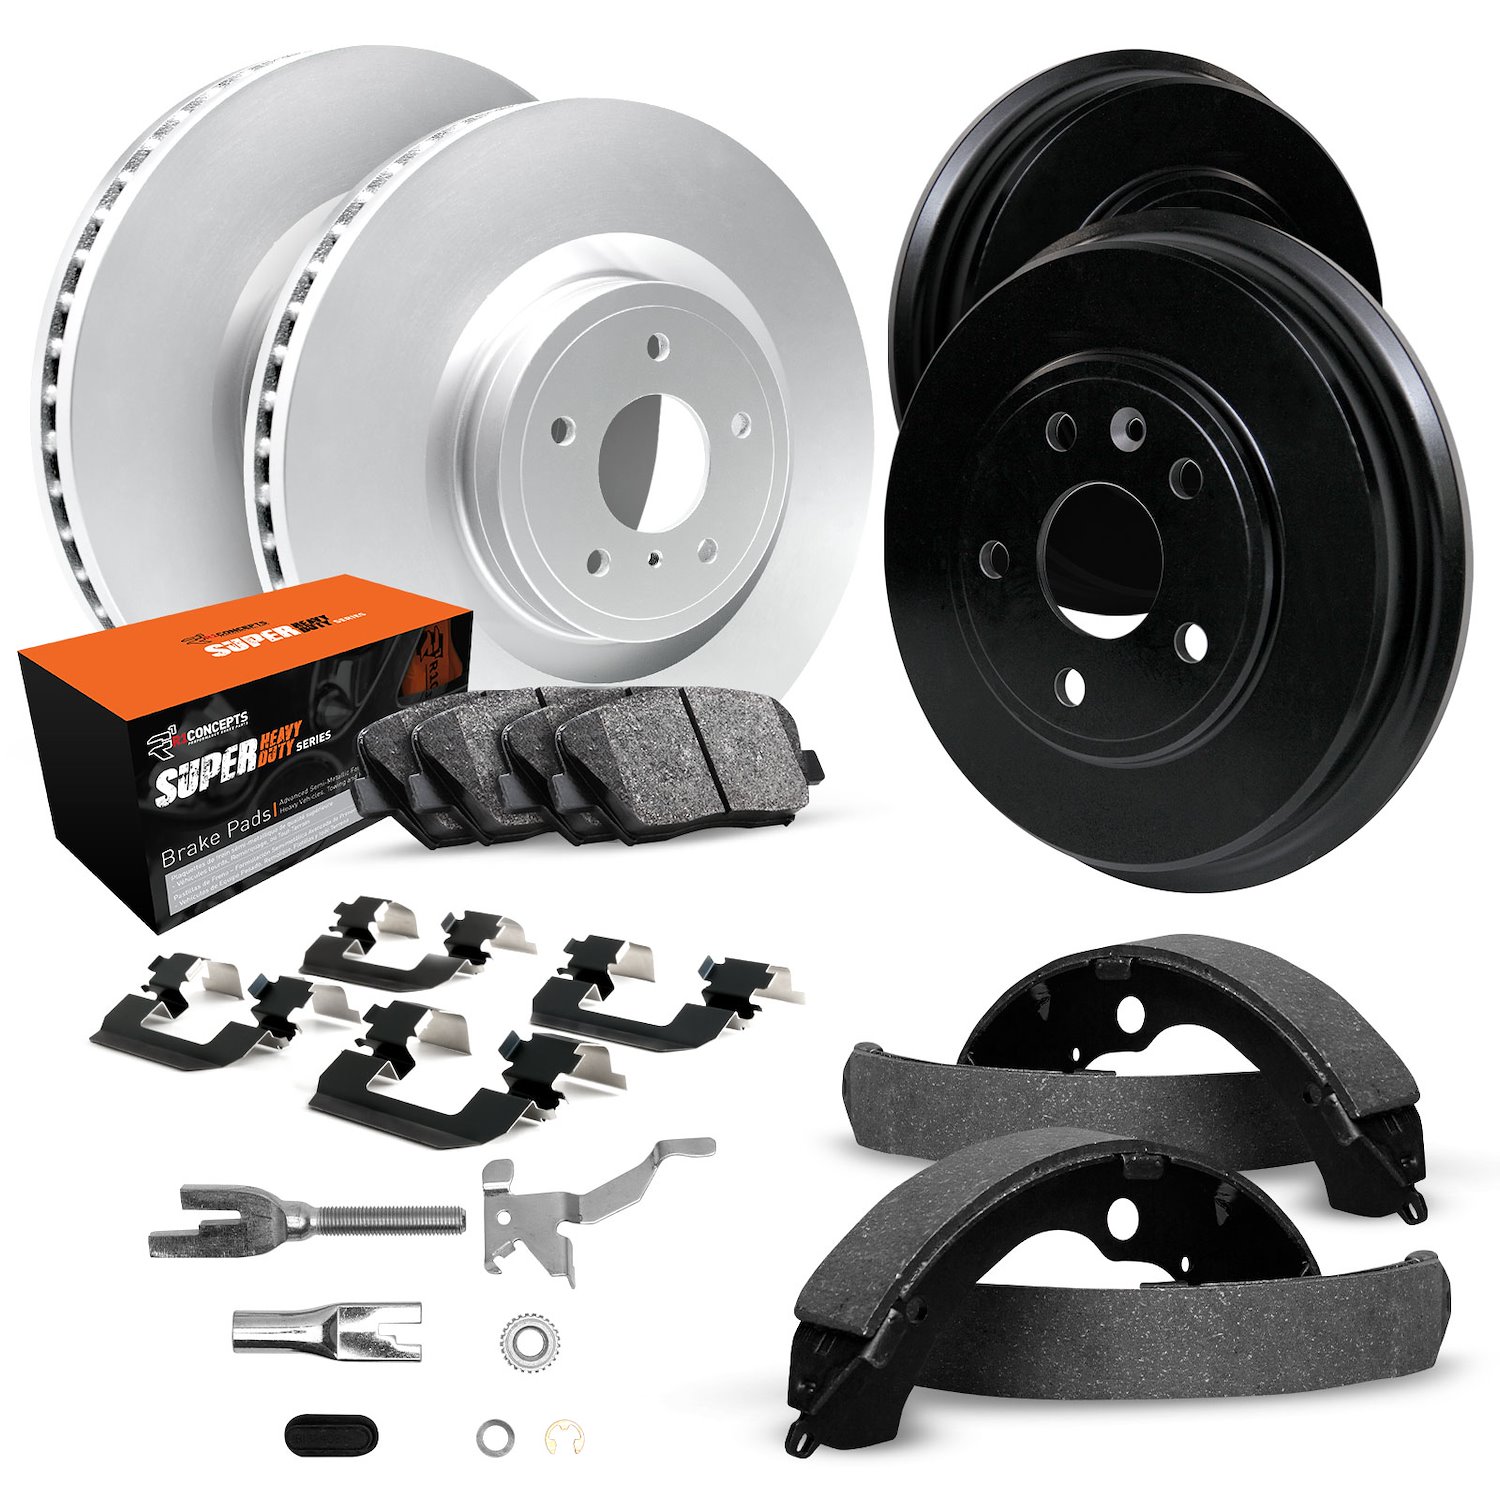 GEO-Carbon Brake Rotor & Drum Set w/Super-Duty Pads, Shoes, Hardware/Adjusters, 1973-1974 Ford/Lincoln/Mercury/Mazda